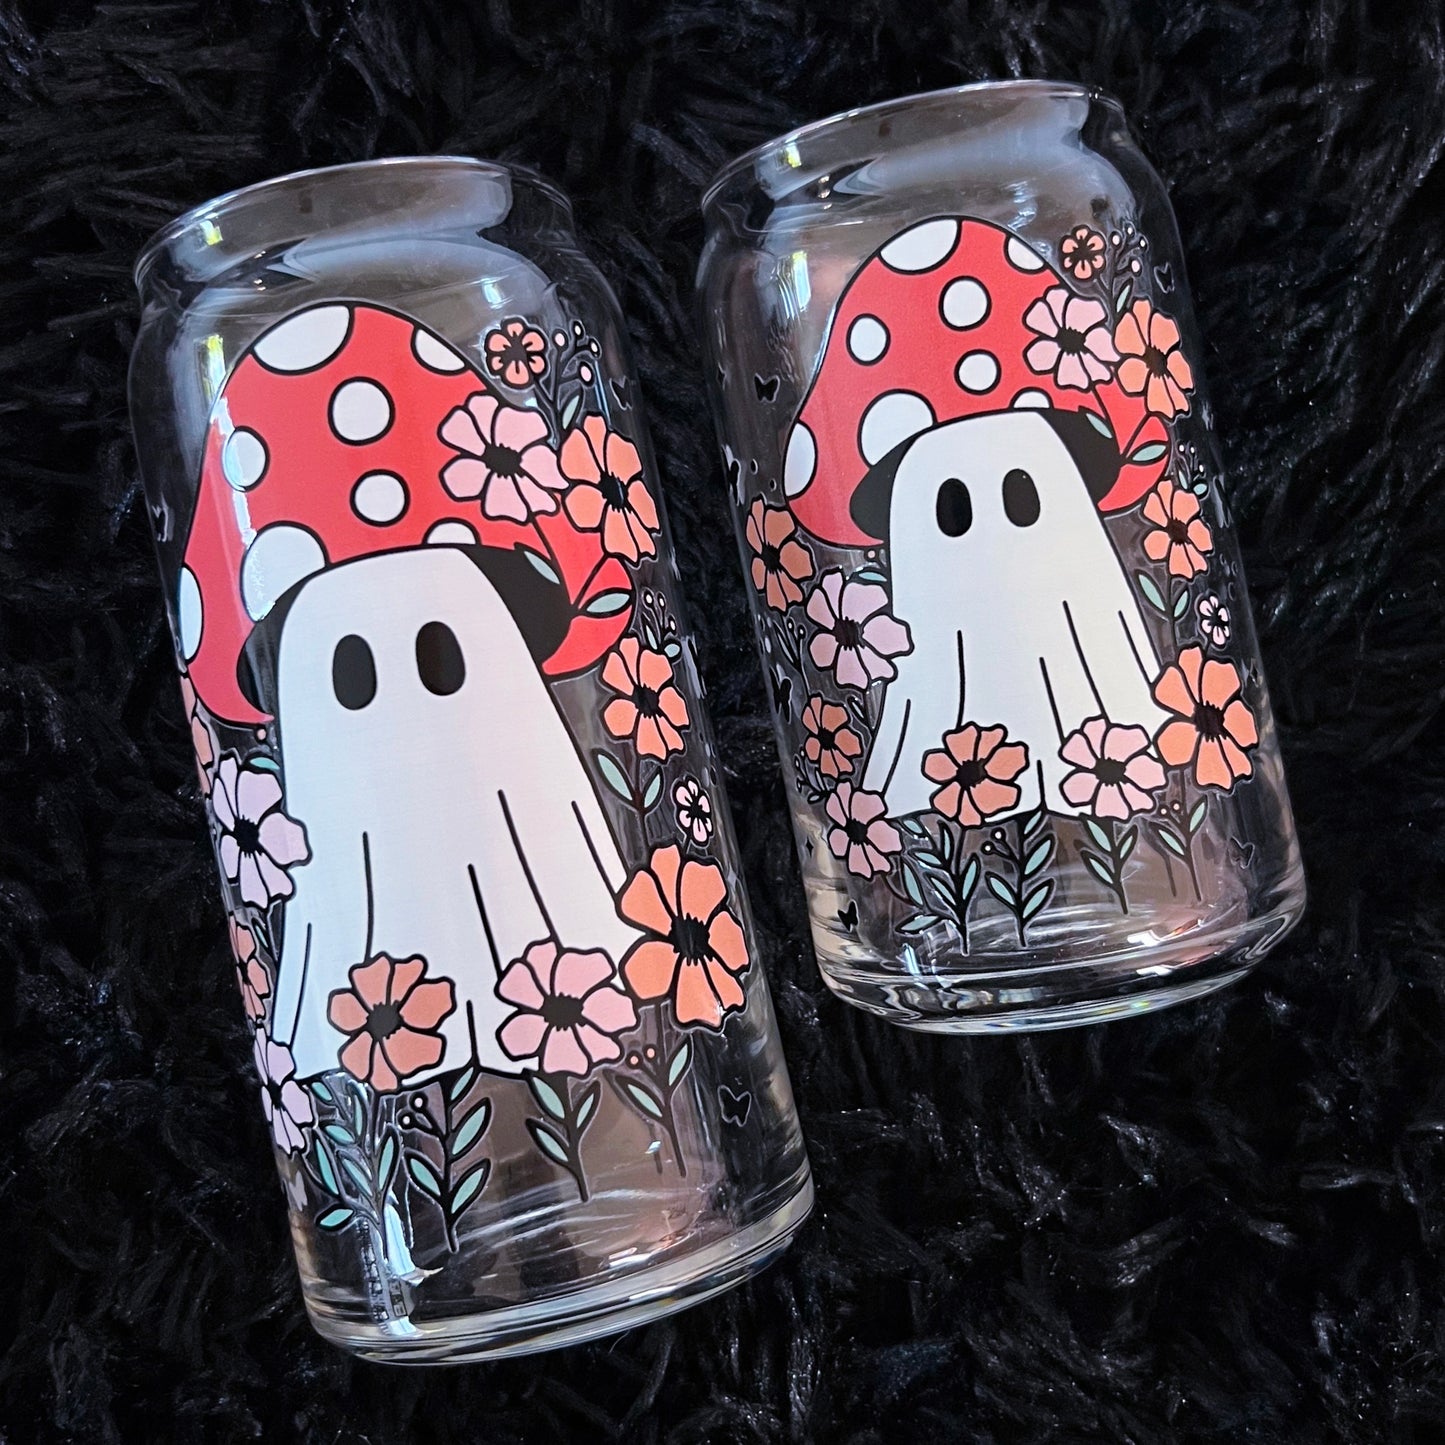 Floral Ghoul - Mushroom Ghost with flowers